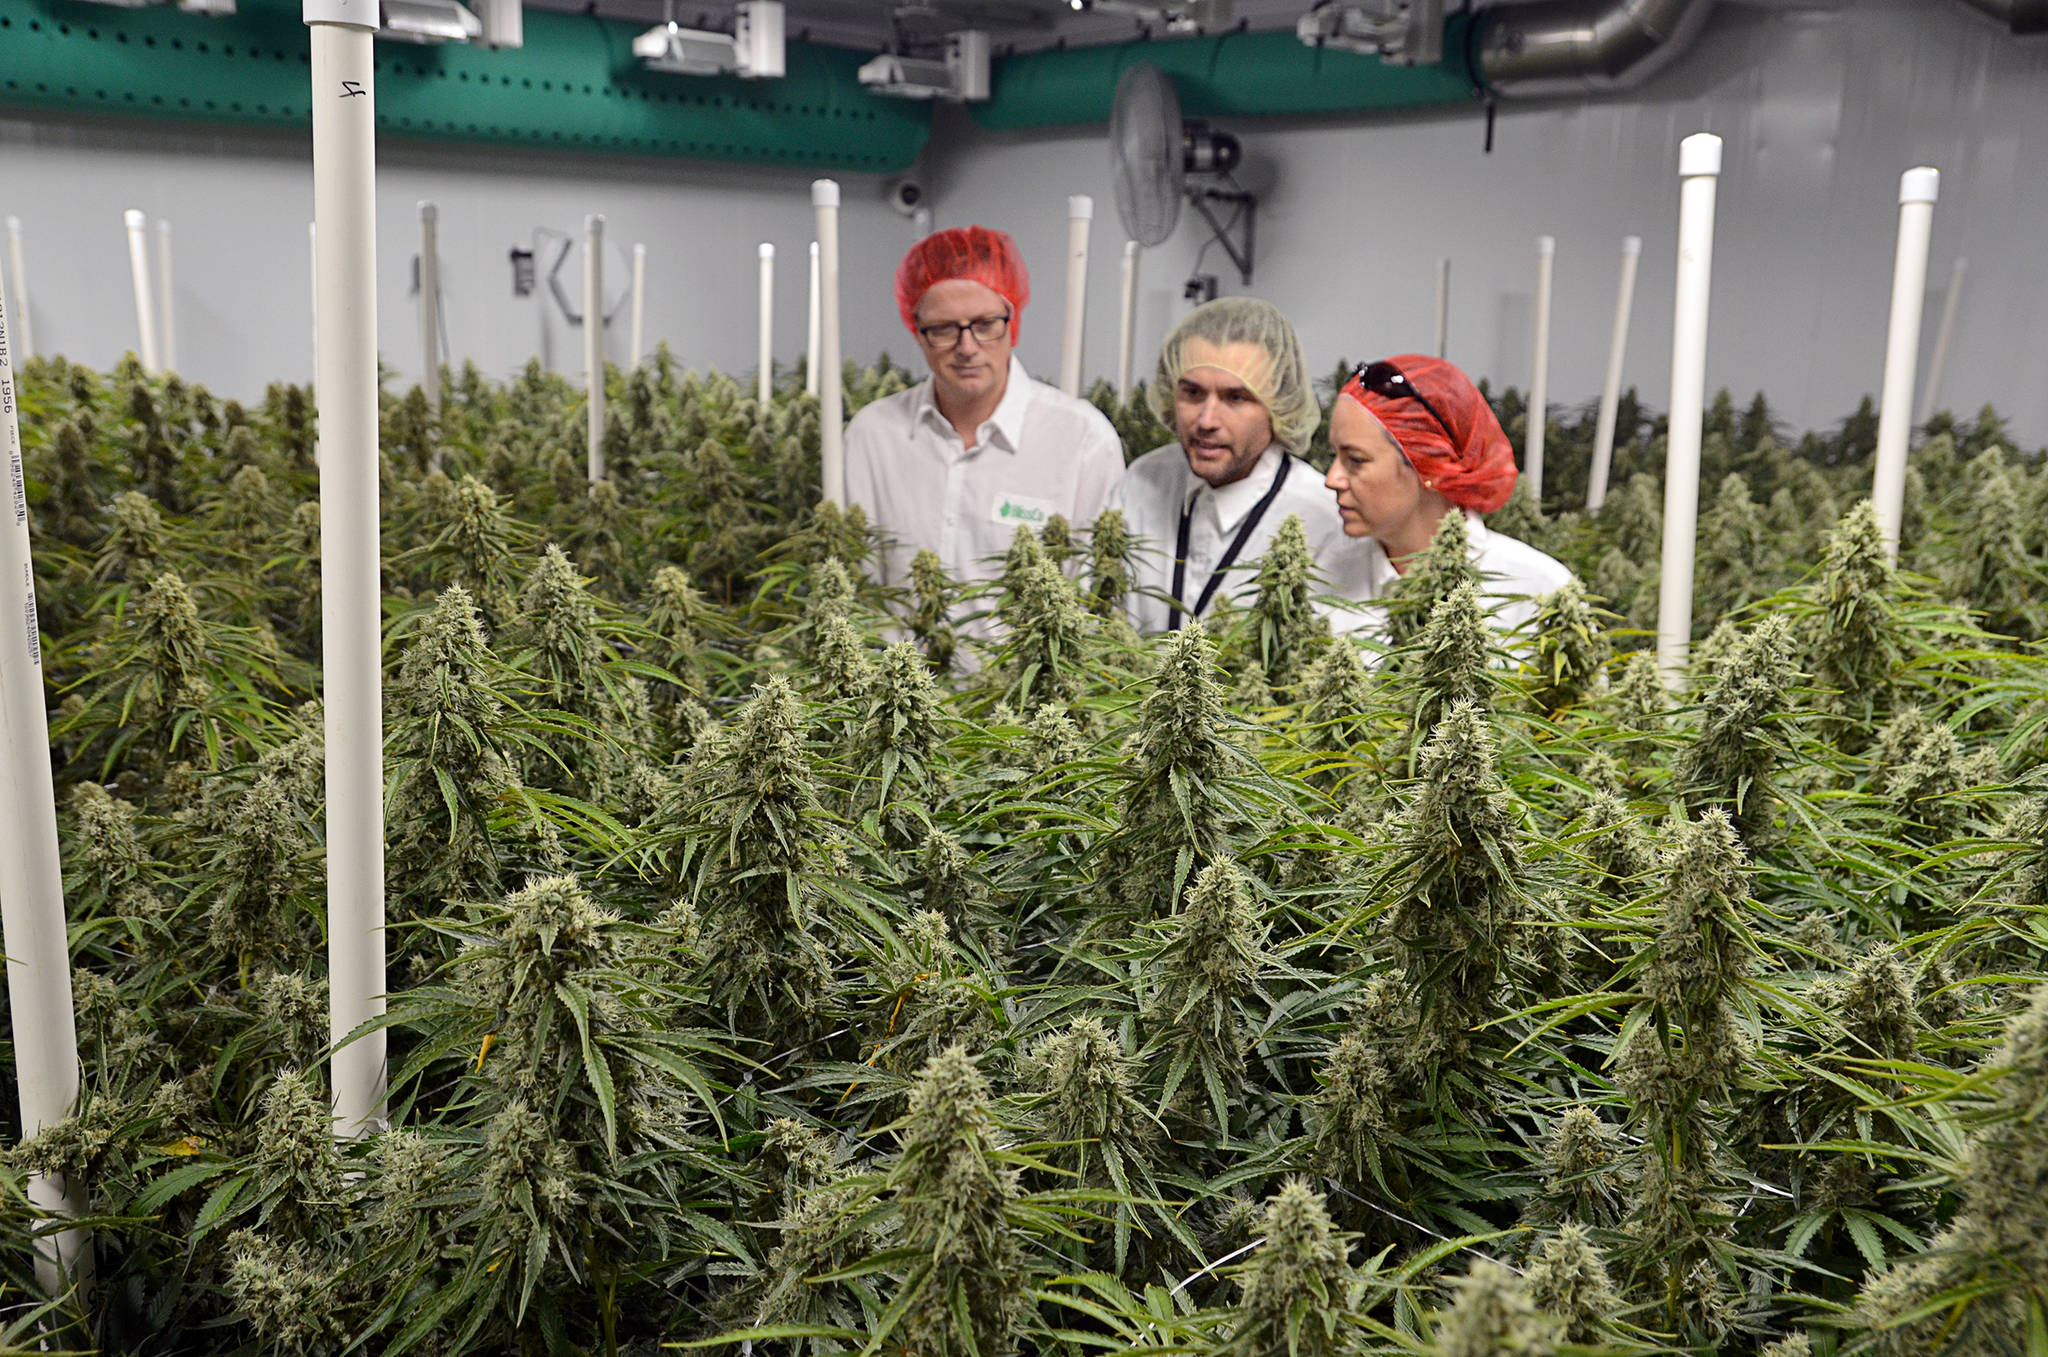 From (hydroponic) farm to table A look inside a cannabis production facility